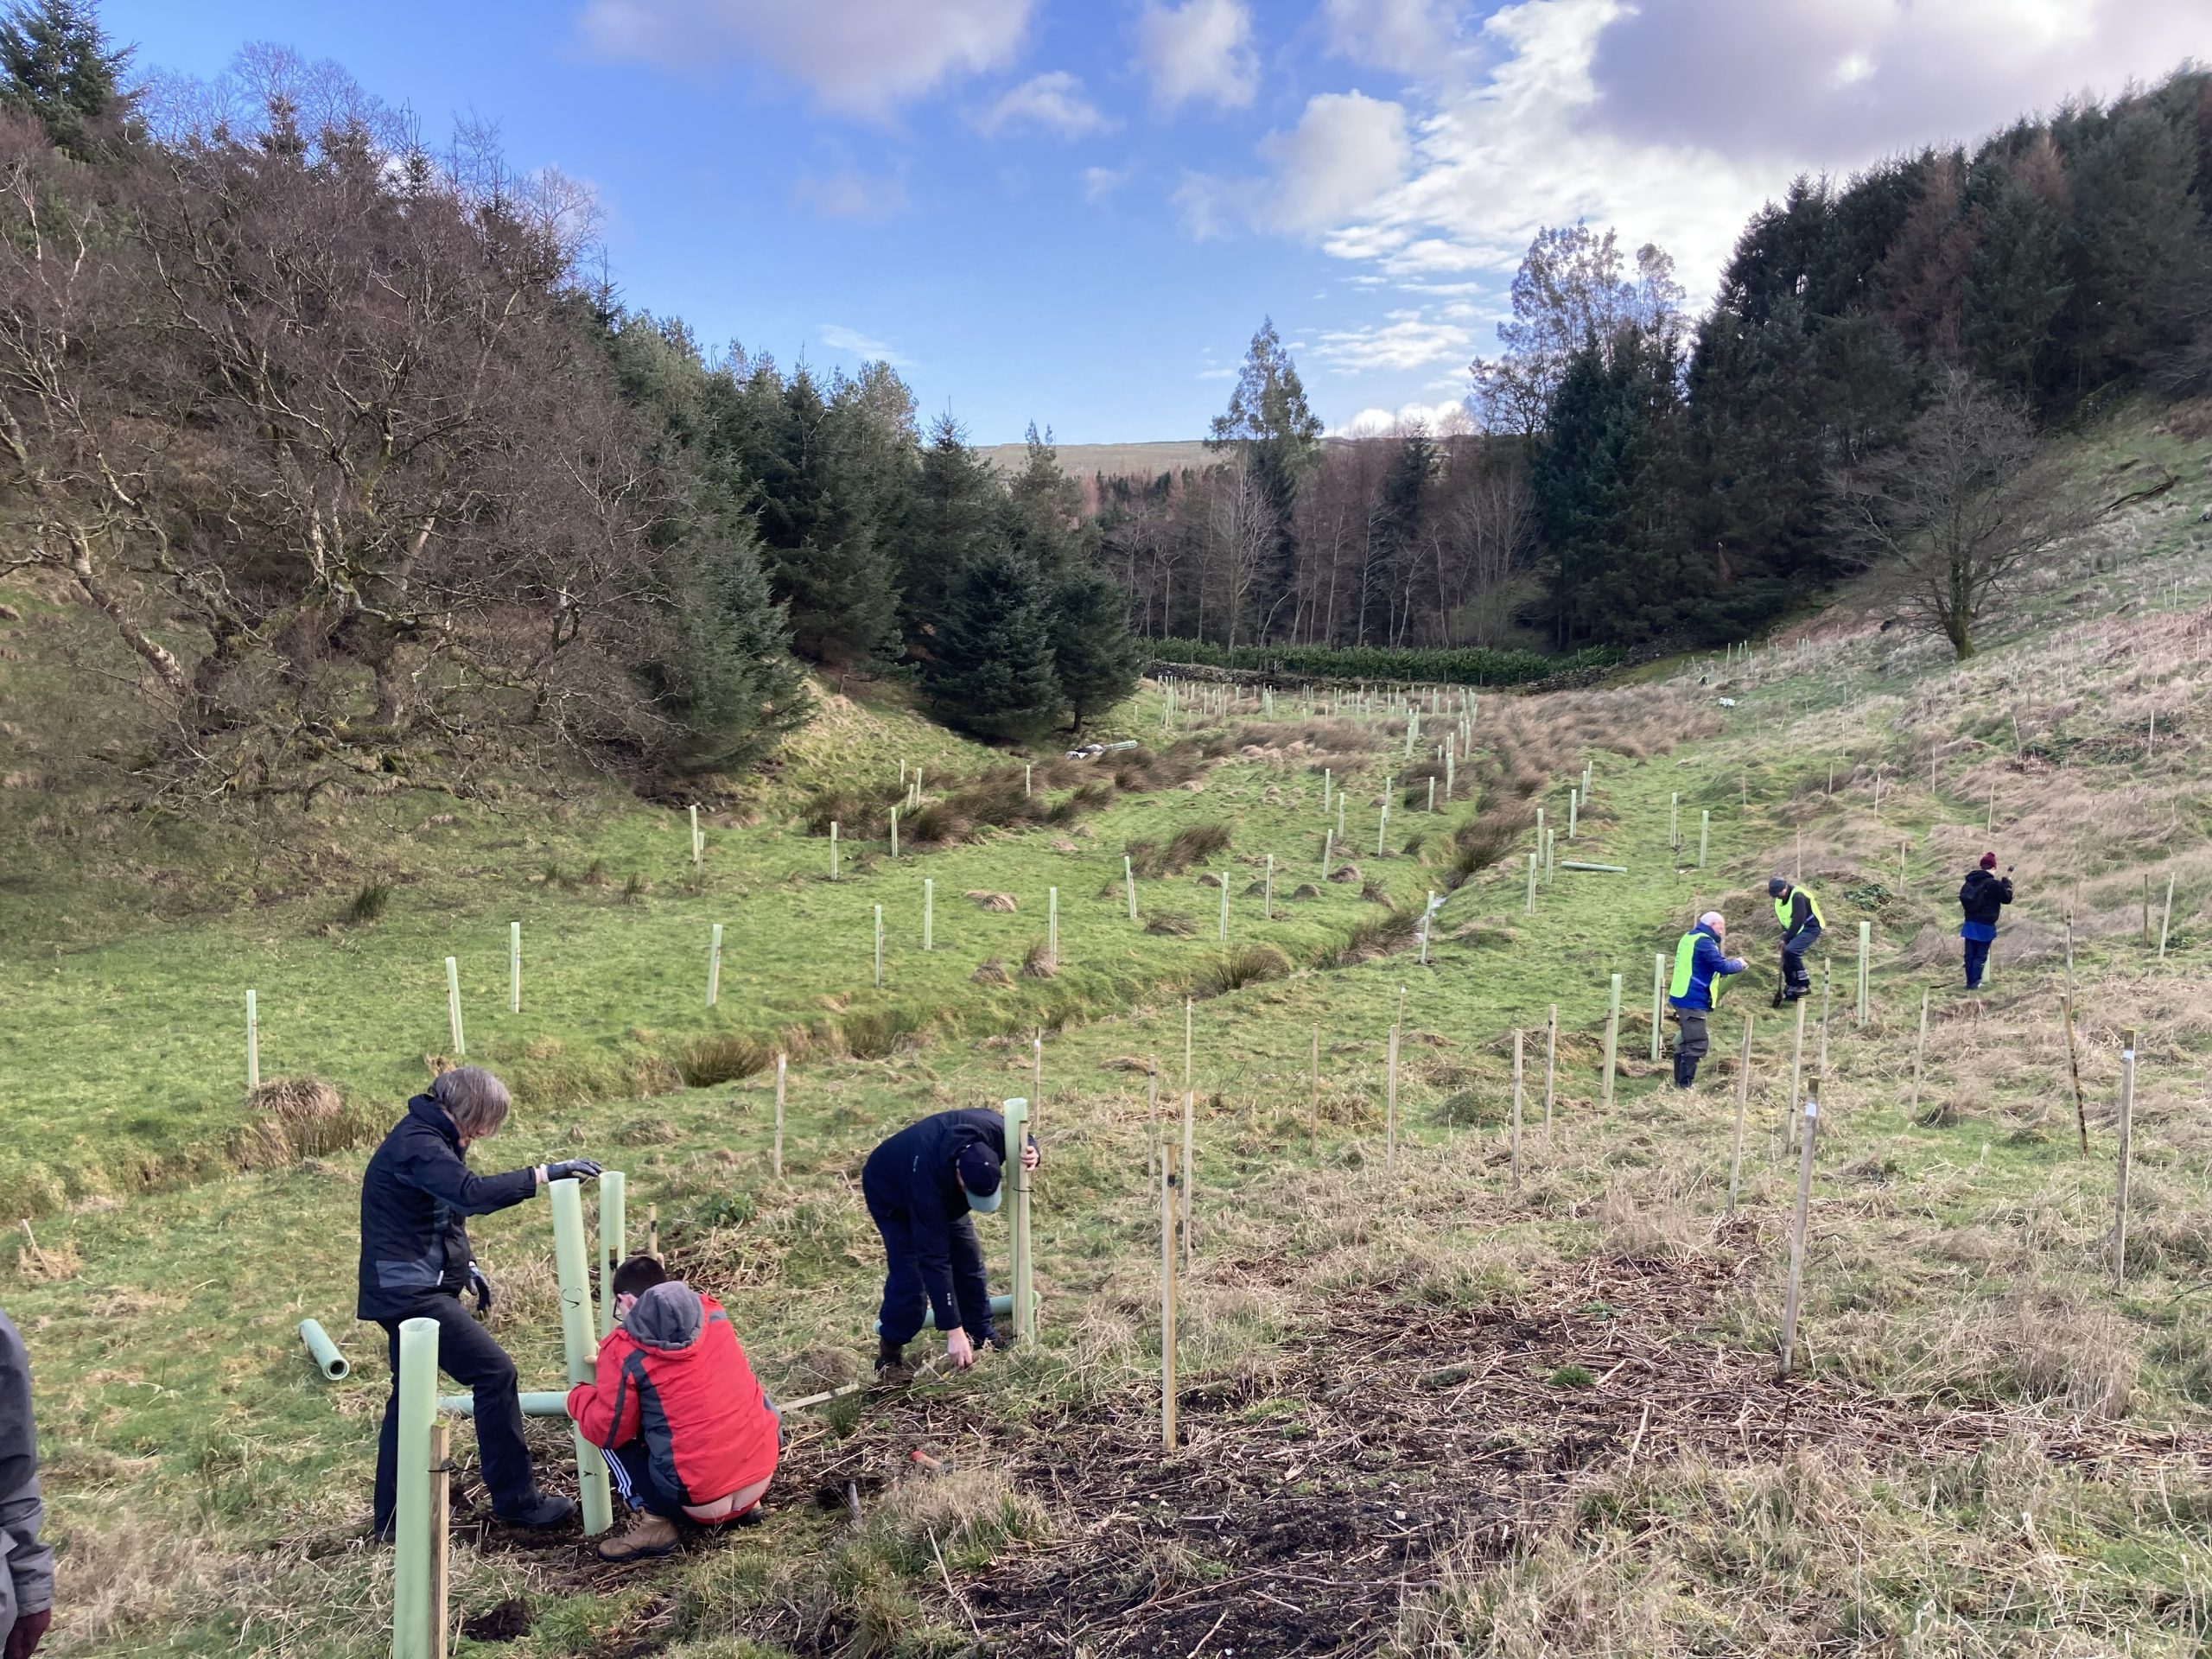 A group of people planting trees in the countryside